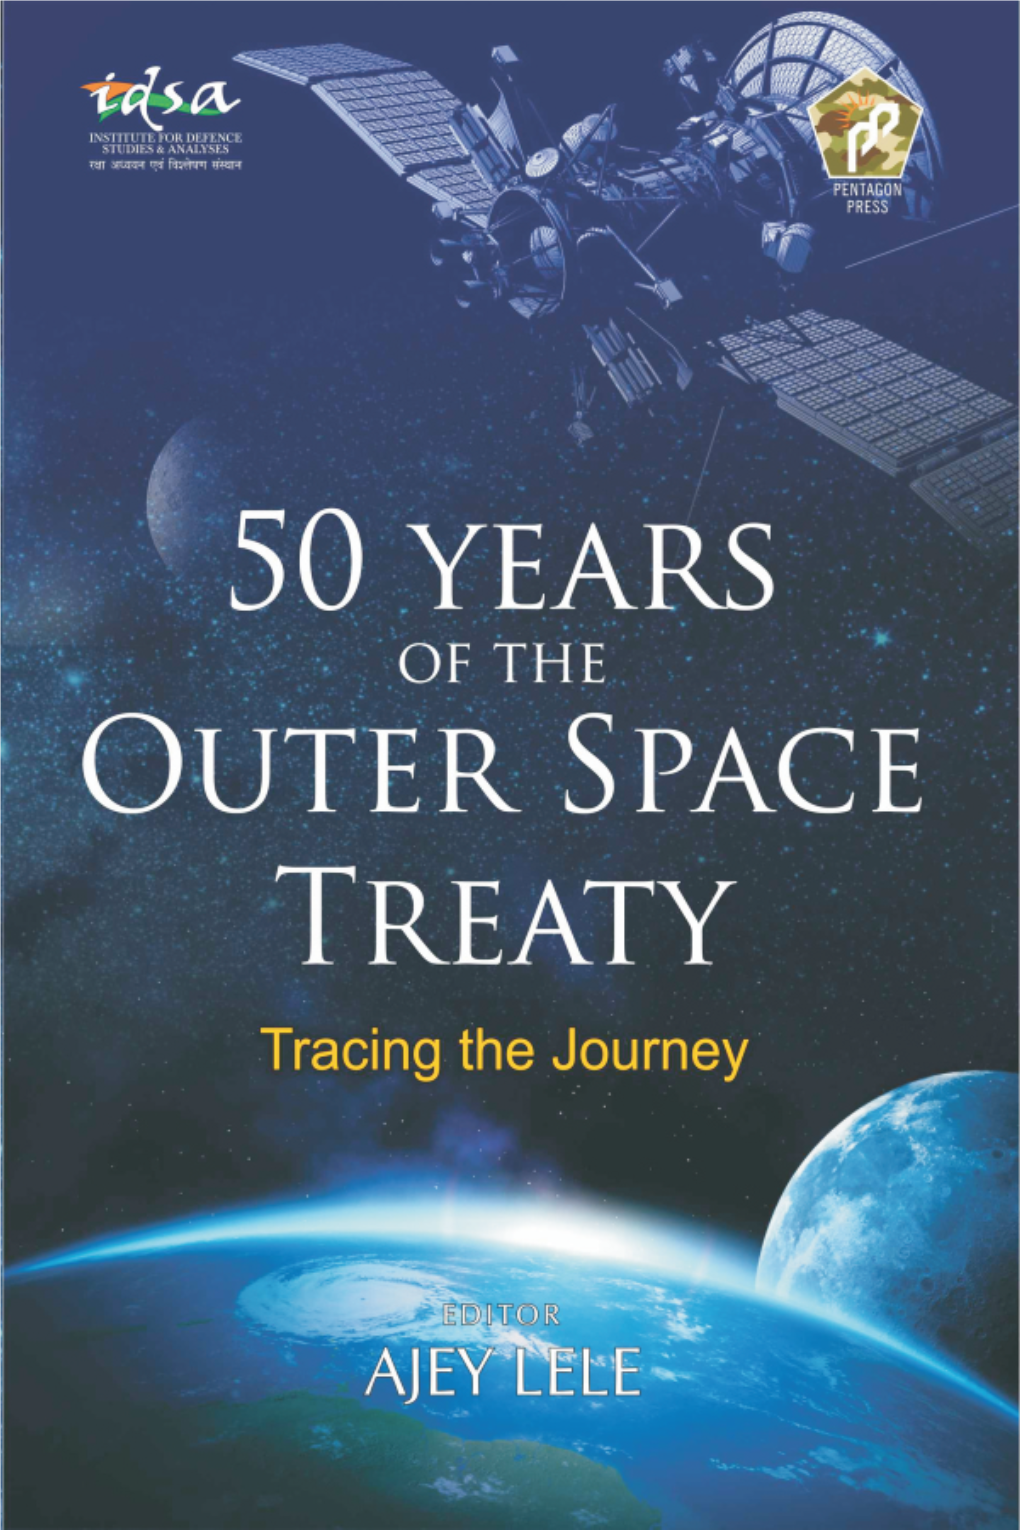 OUTER SPACE TREATY Tracing the Journey